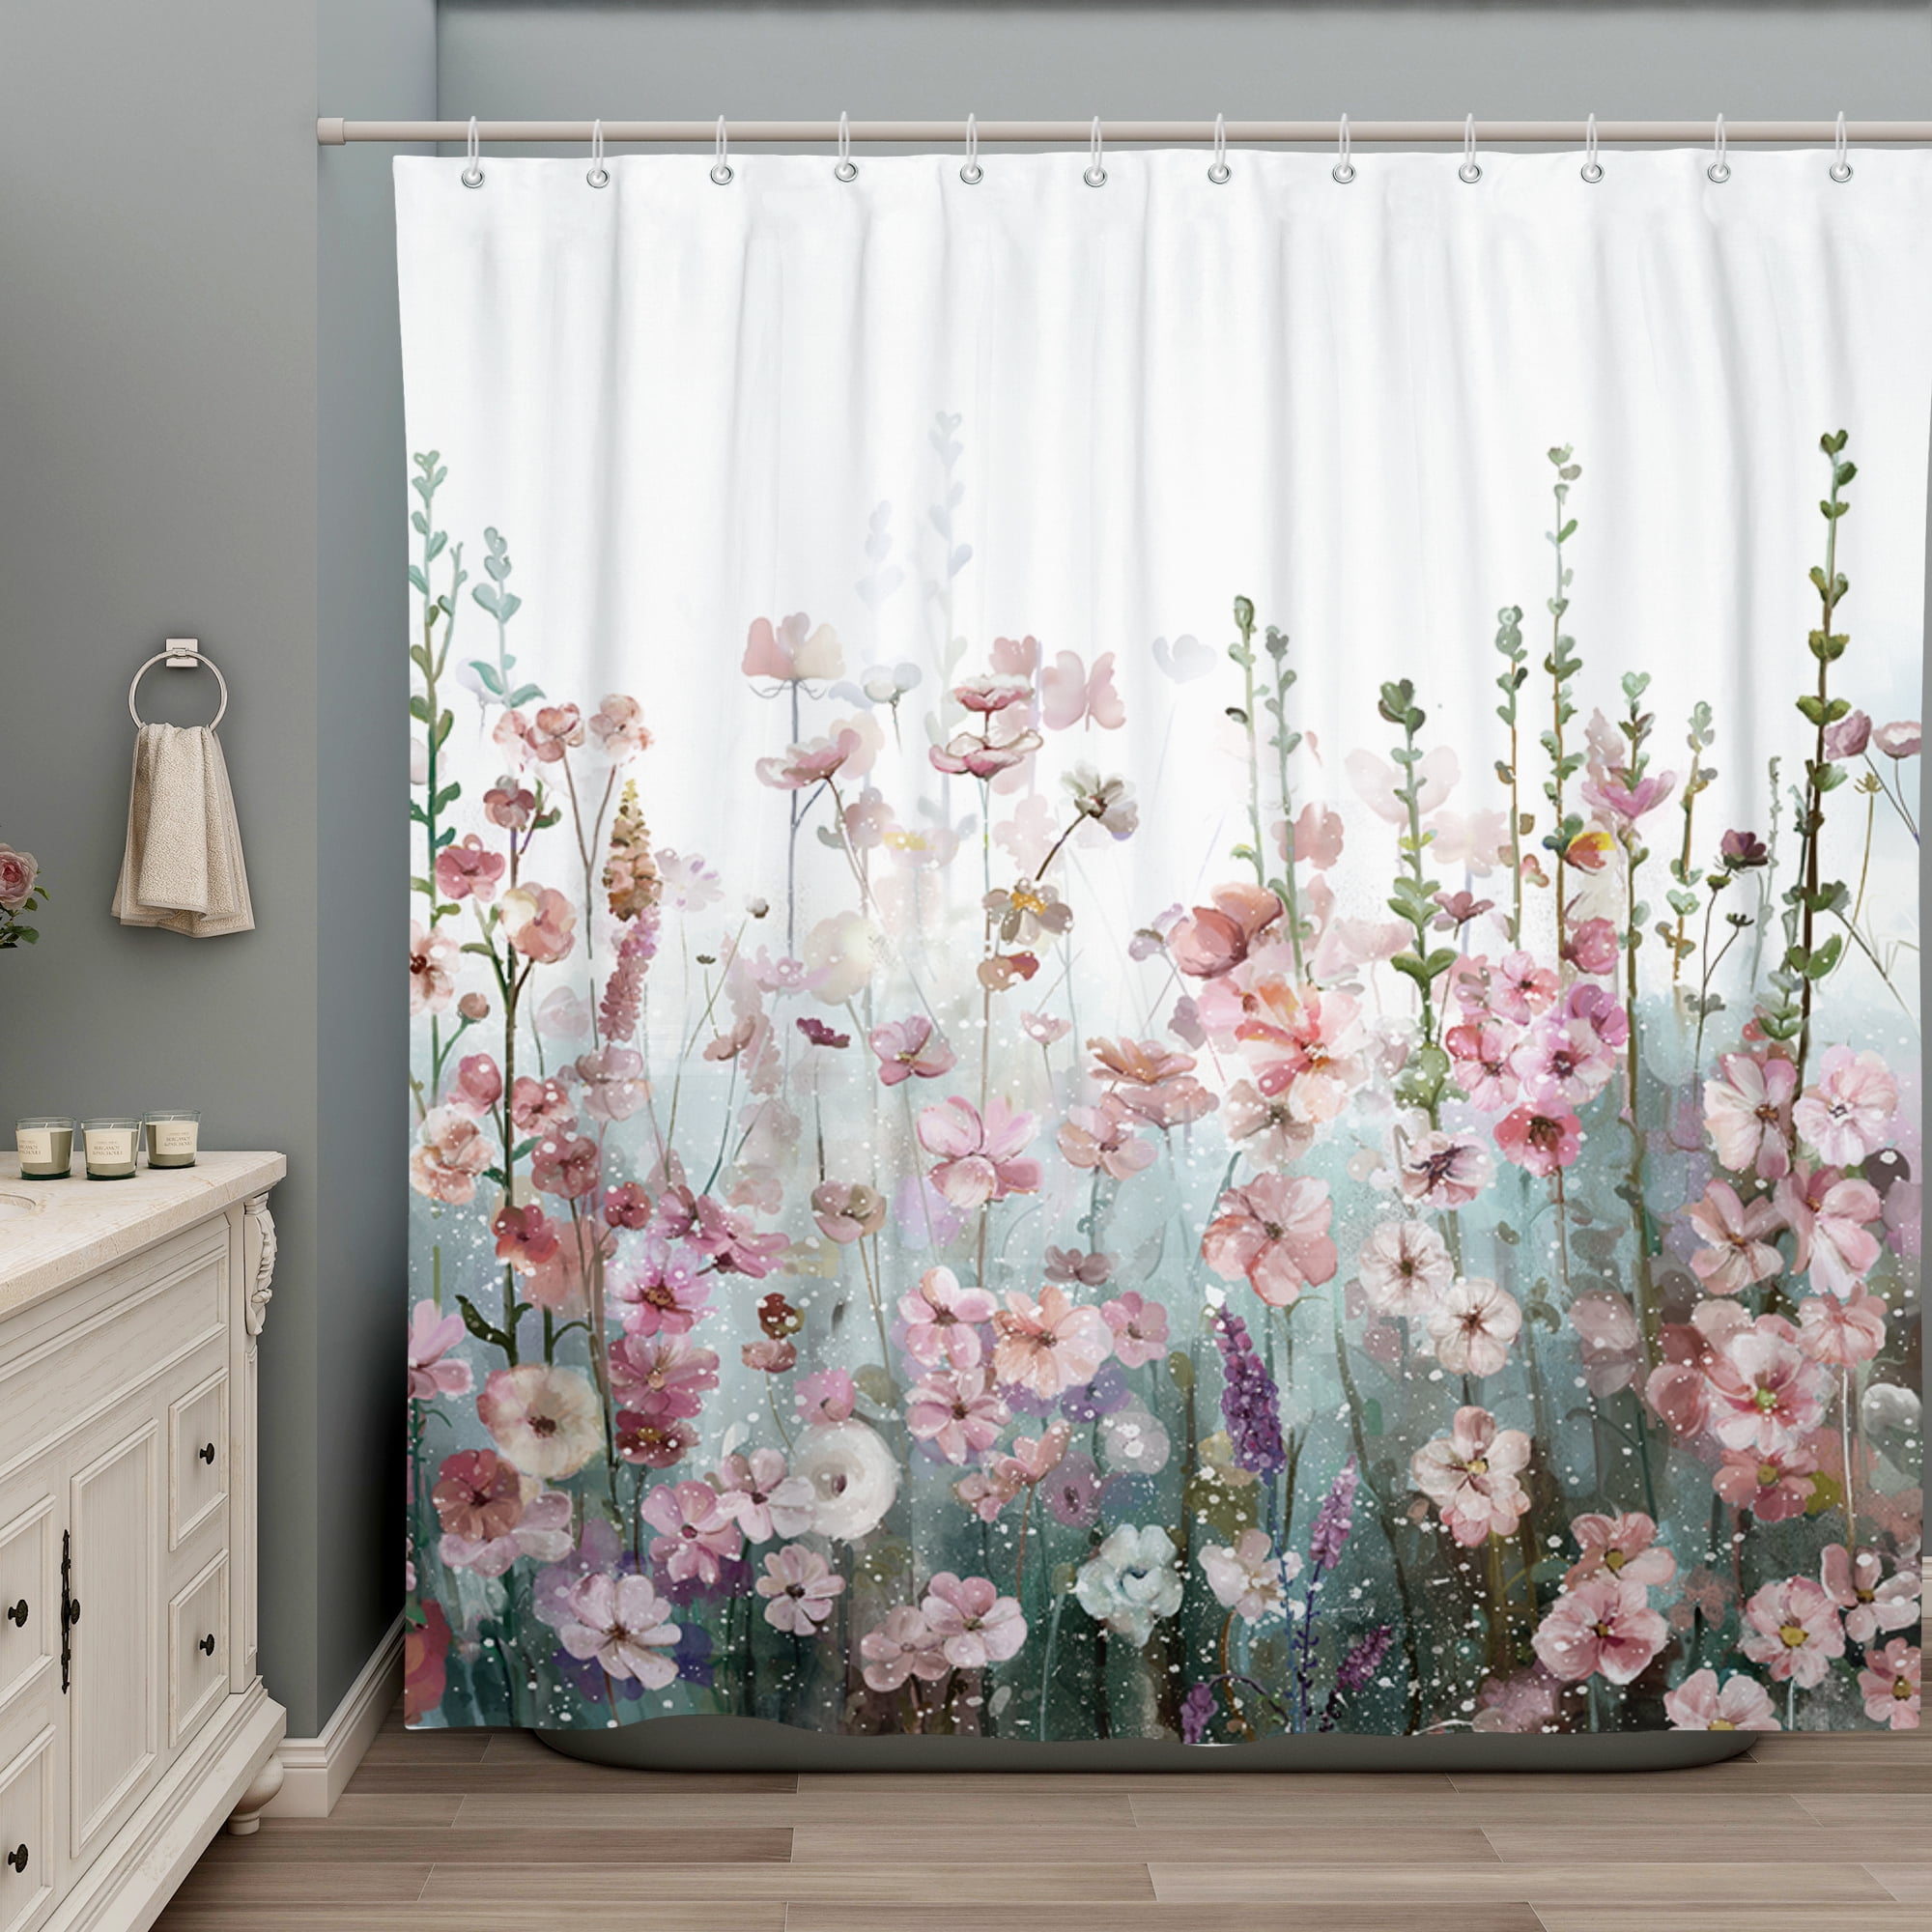 Afuly Floral Shower Curtain for Bathroom Colorful Flowers Pink Wildflower Plants  Decor Nature Shower Curtains with Hooks, 72 x 72 inch 